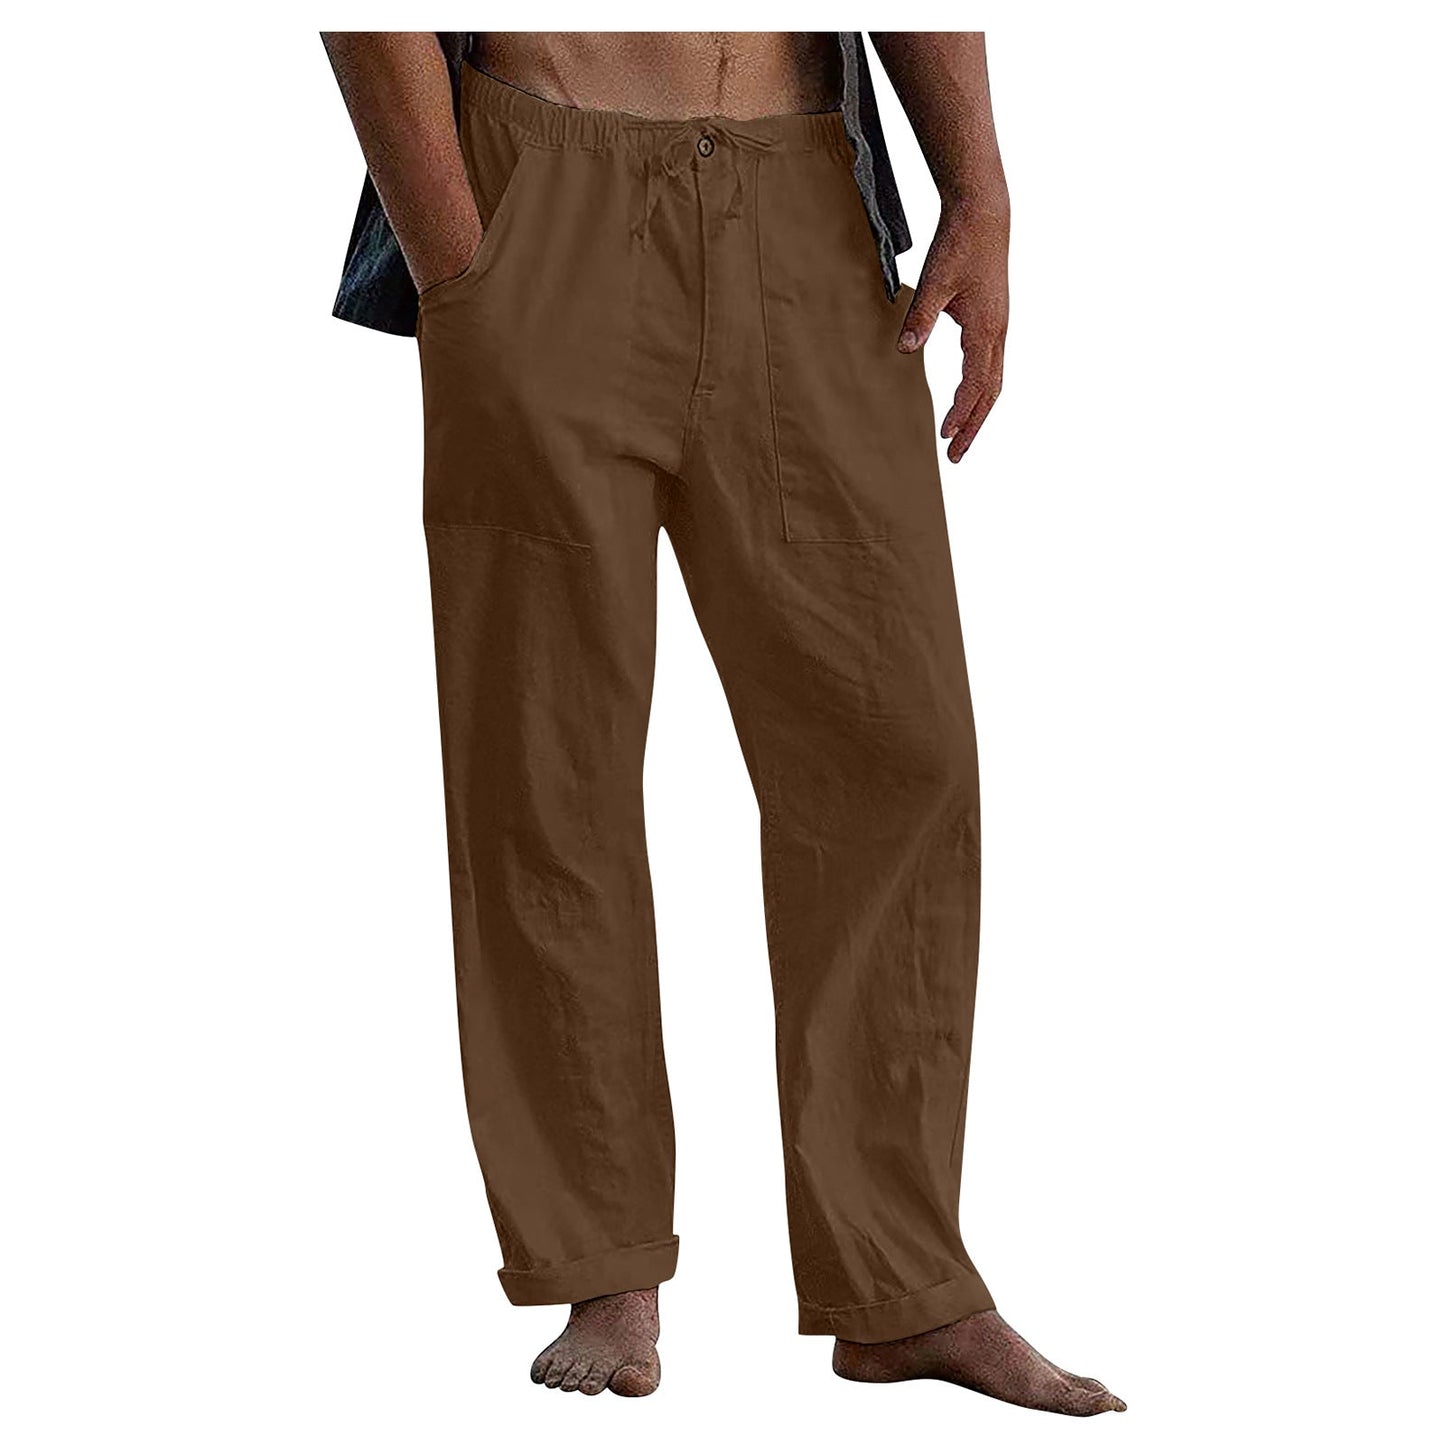 Casual Linen Men's Summer Beach Pants with Elastic Waist-Pants-Free Shipping at meselling99